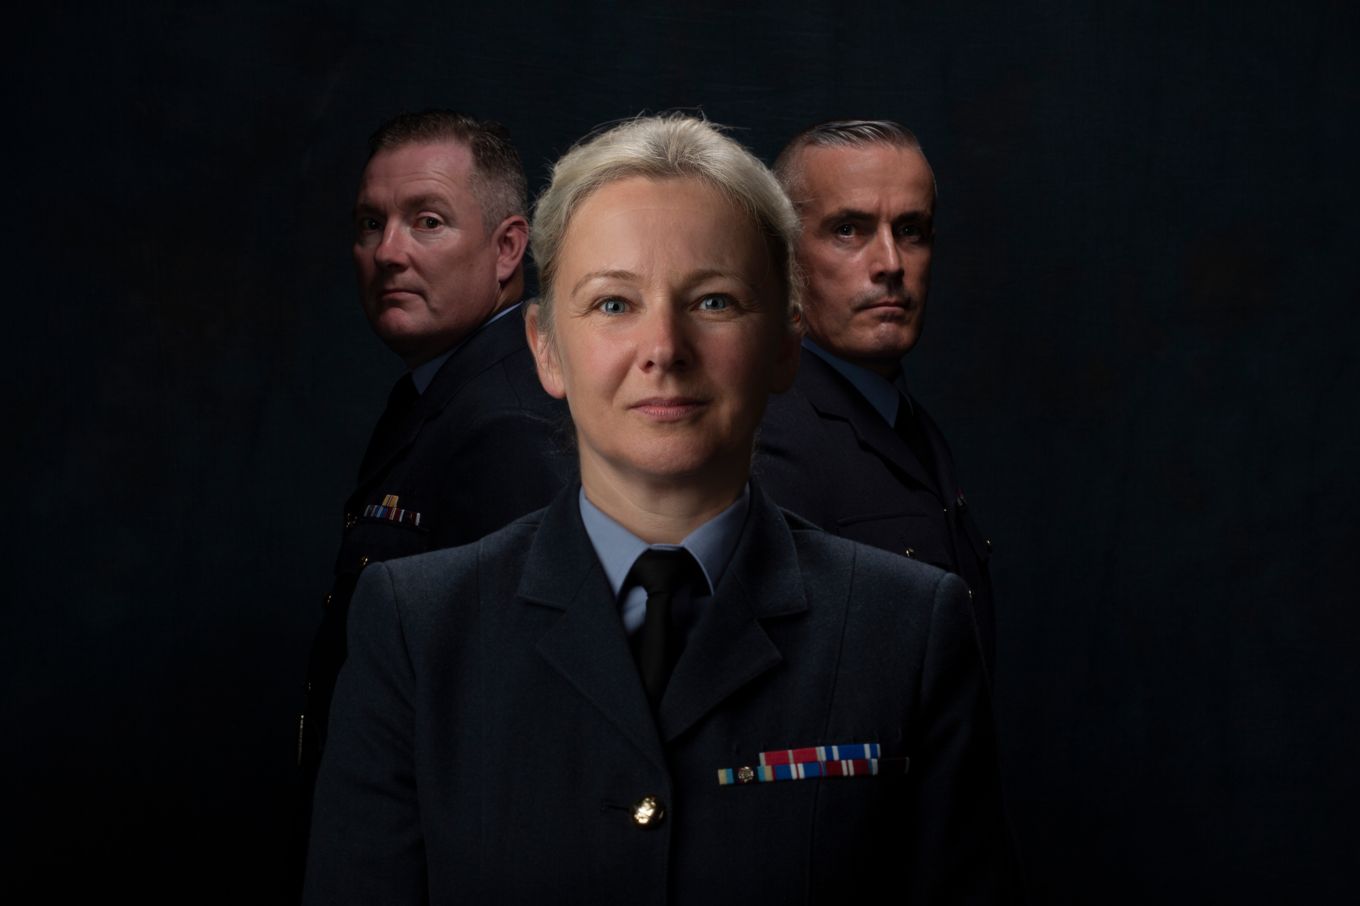 From left to right: Warrant Officer Si Bervoets, Group Captain Jo Lincoln, Warrant Officer Hywel Greening.